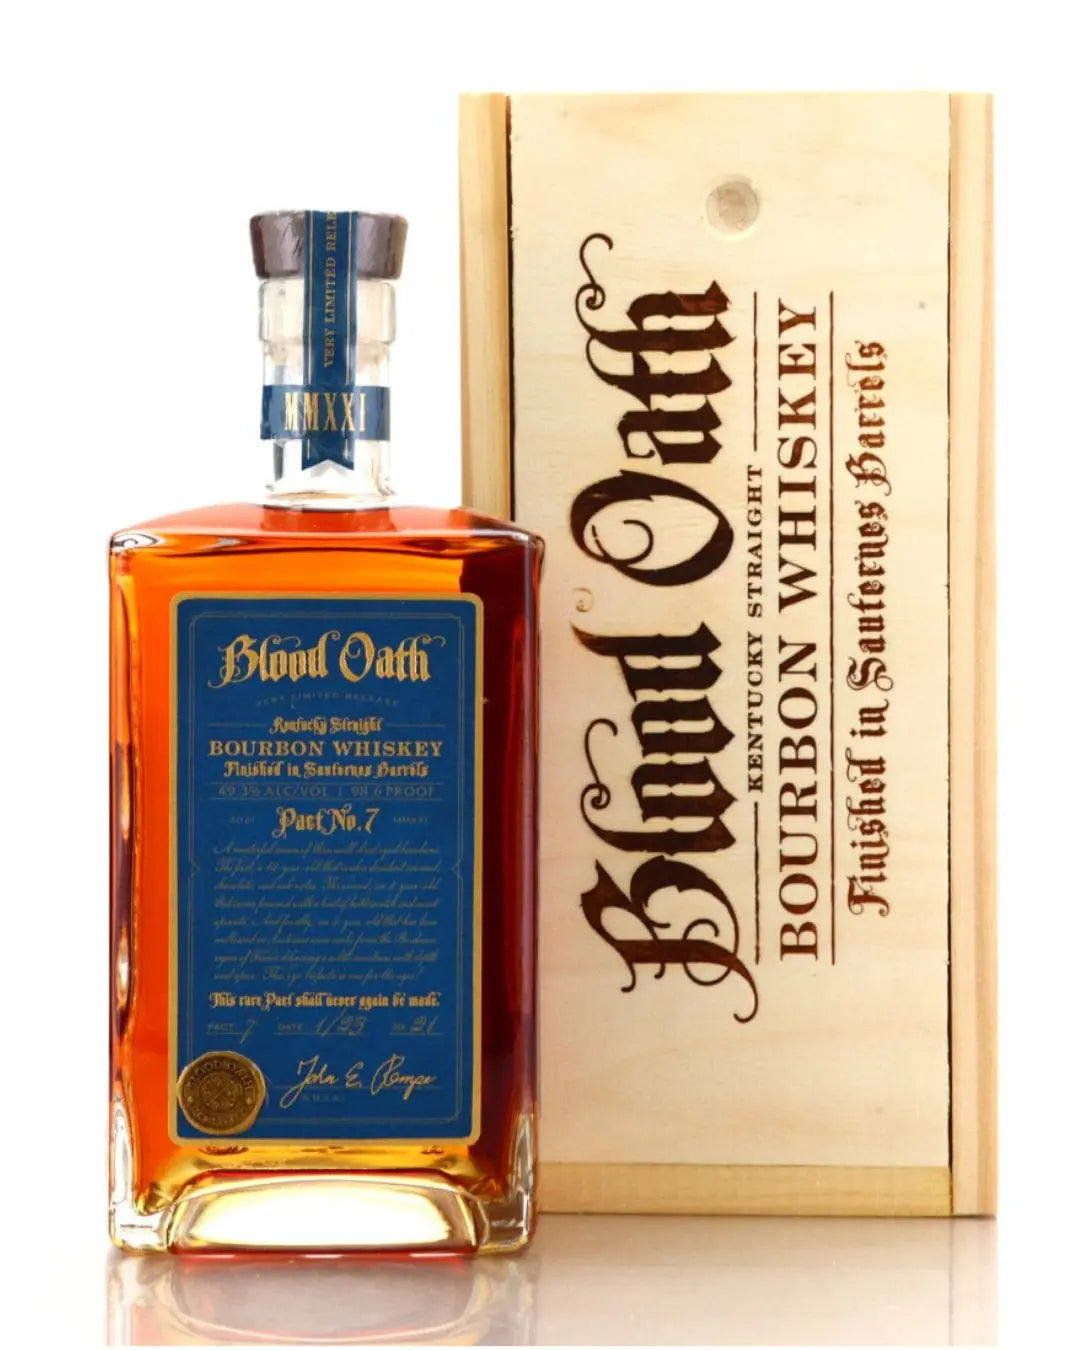 Blood Oath Pact VII Kentucky Straight Bourbon Whiskey, 70 cl Whisky